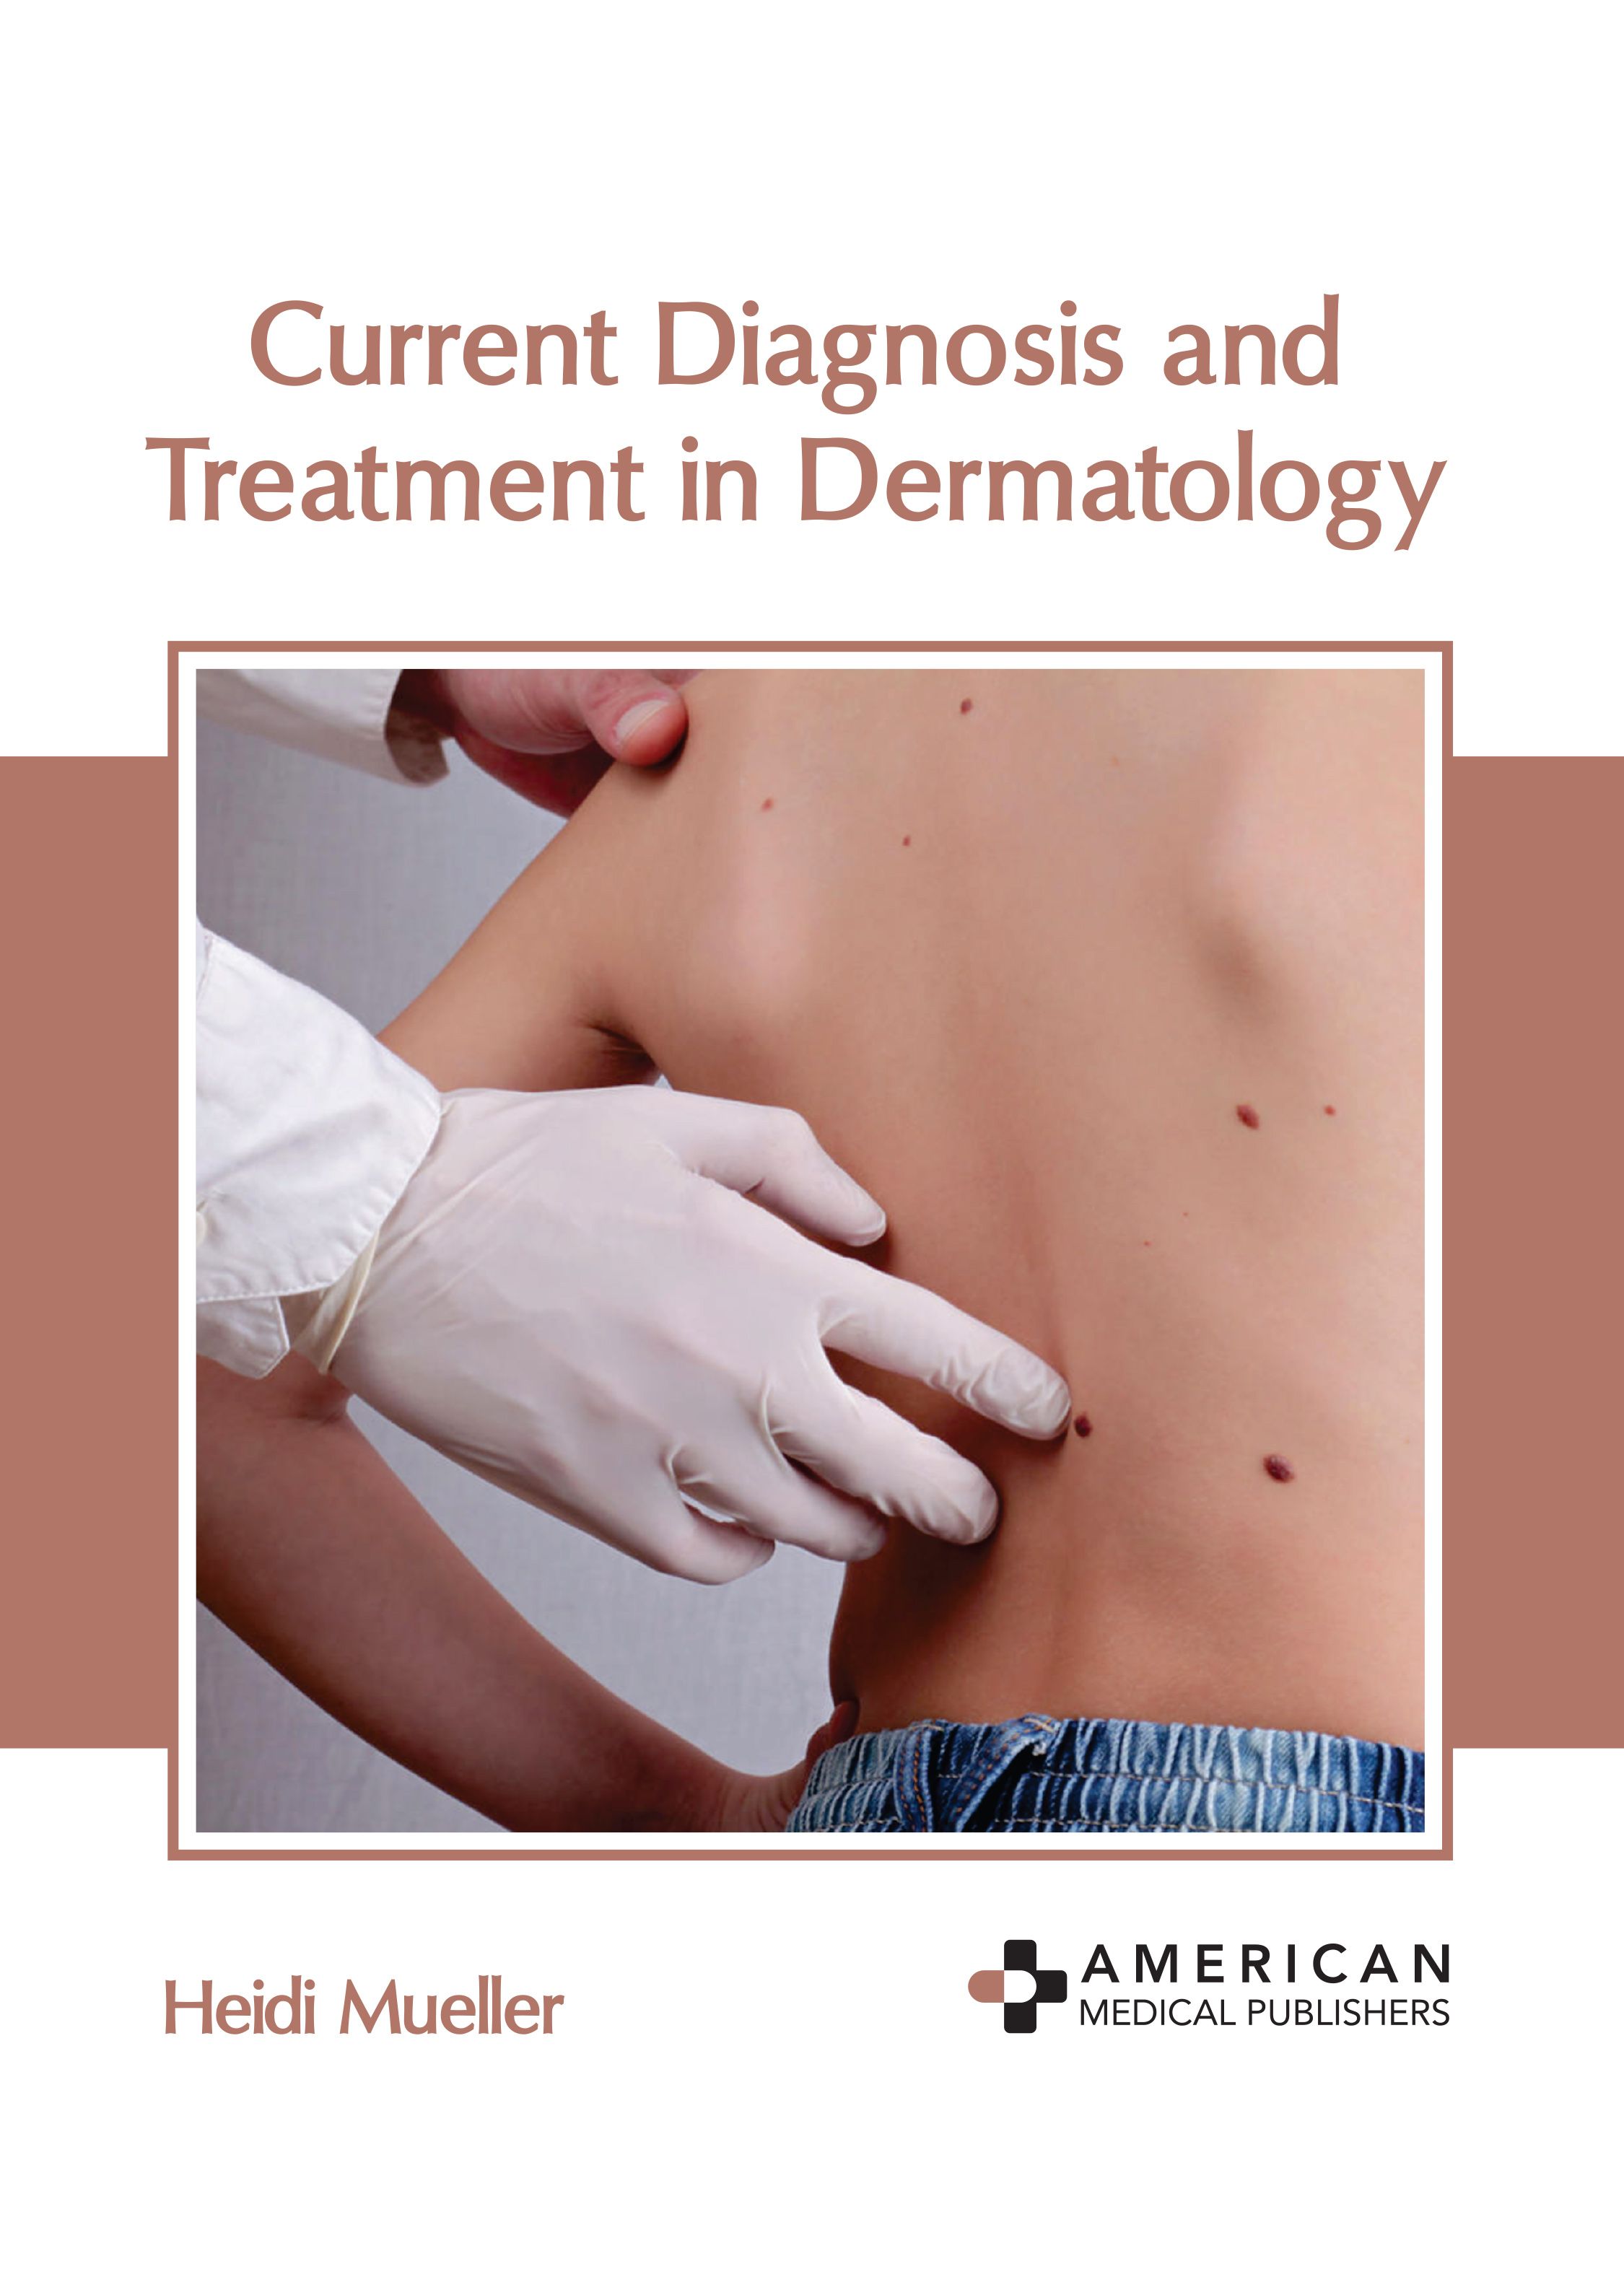 

exclusive-publishers/american-medical-publishers/current-diagnosis-and-treatment-in-dermatology-9798887400297